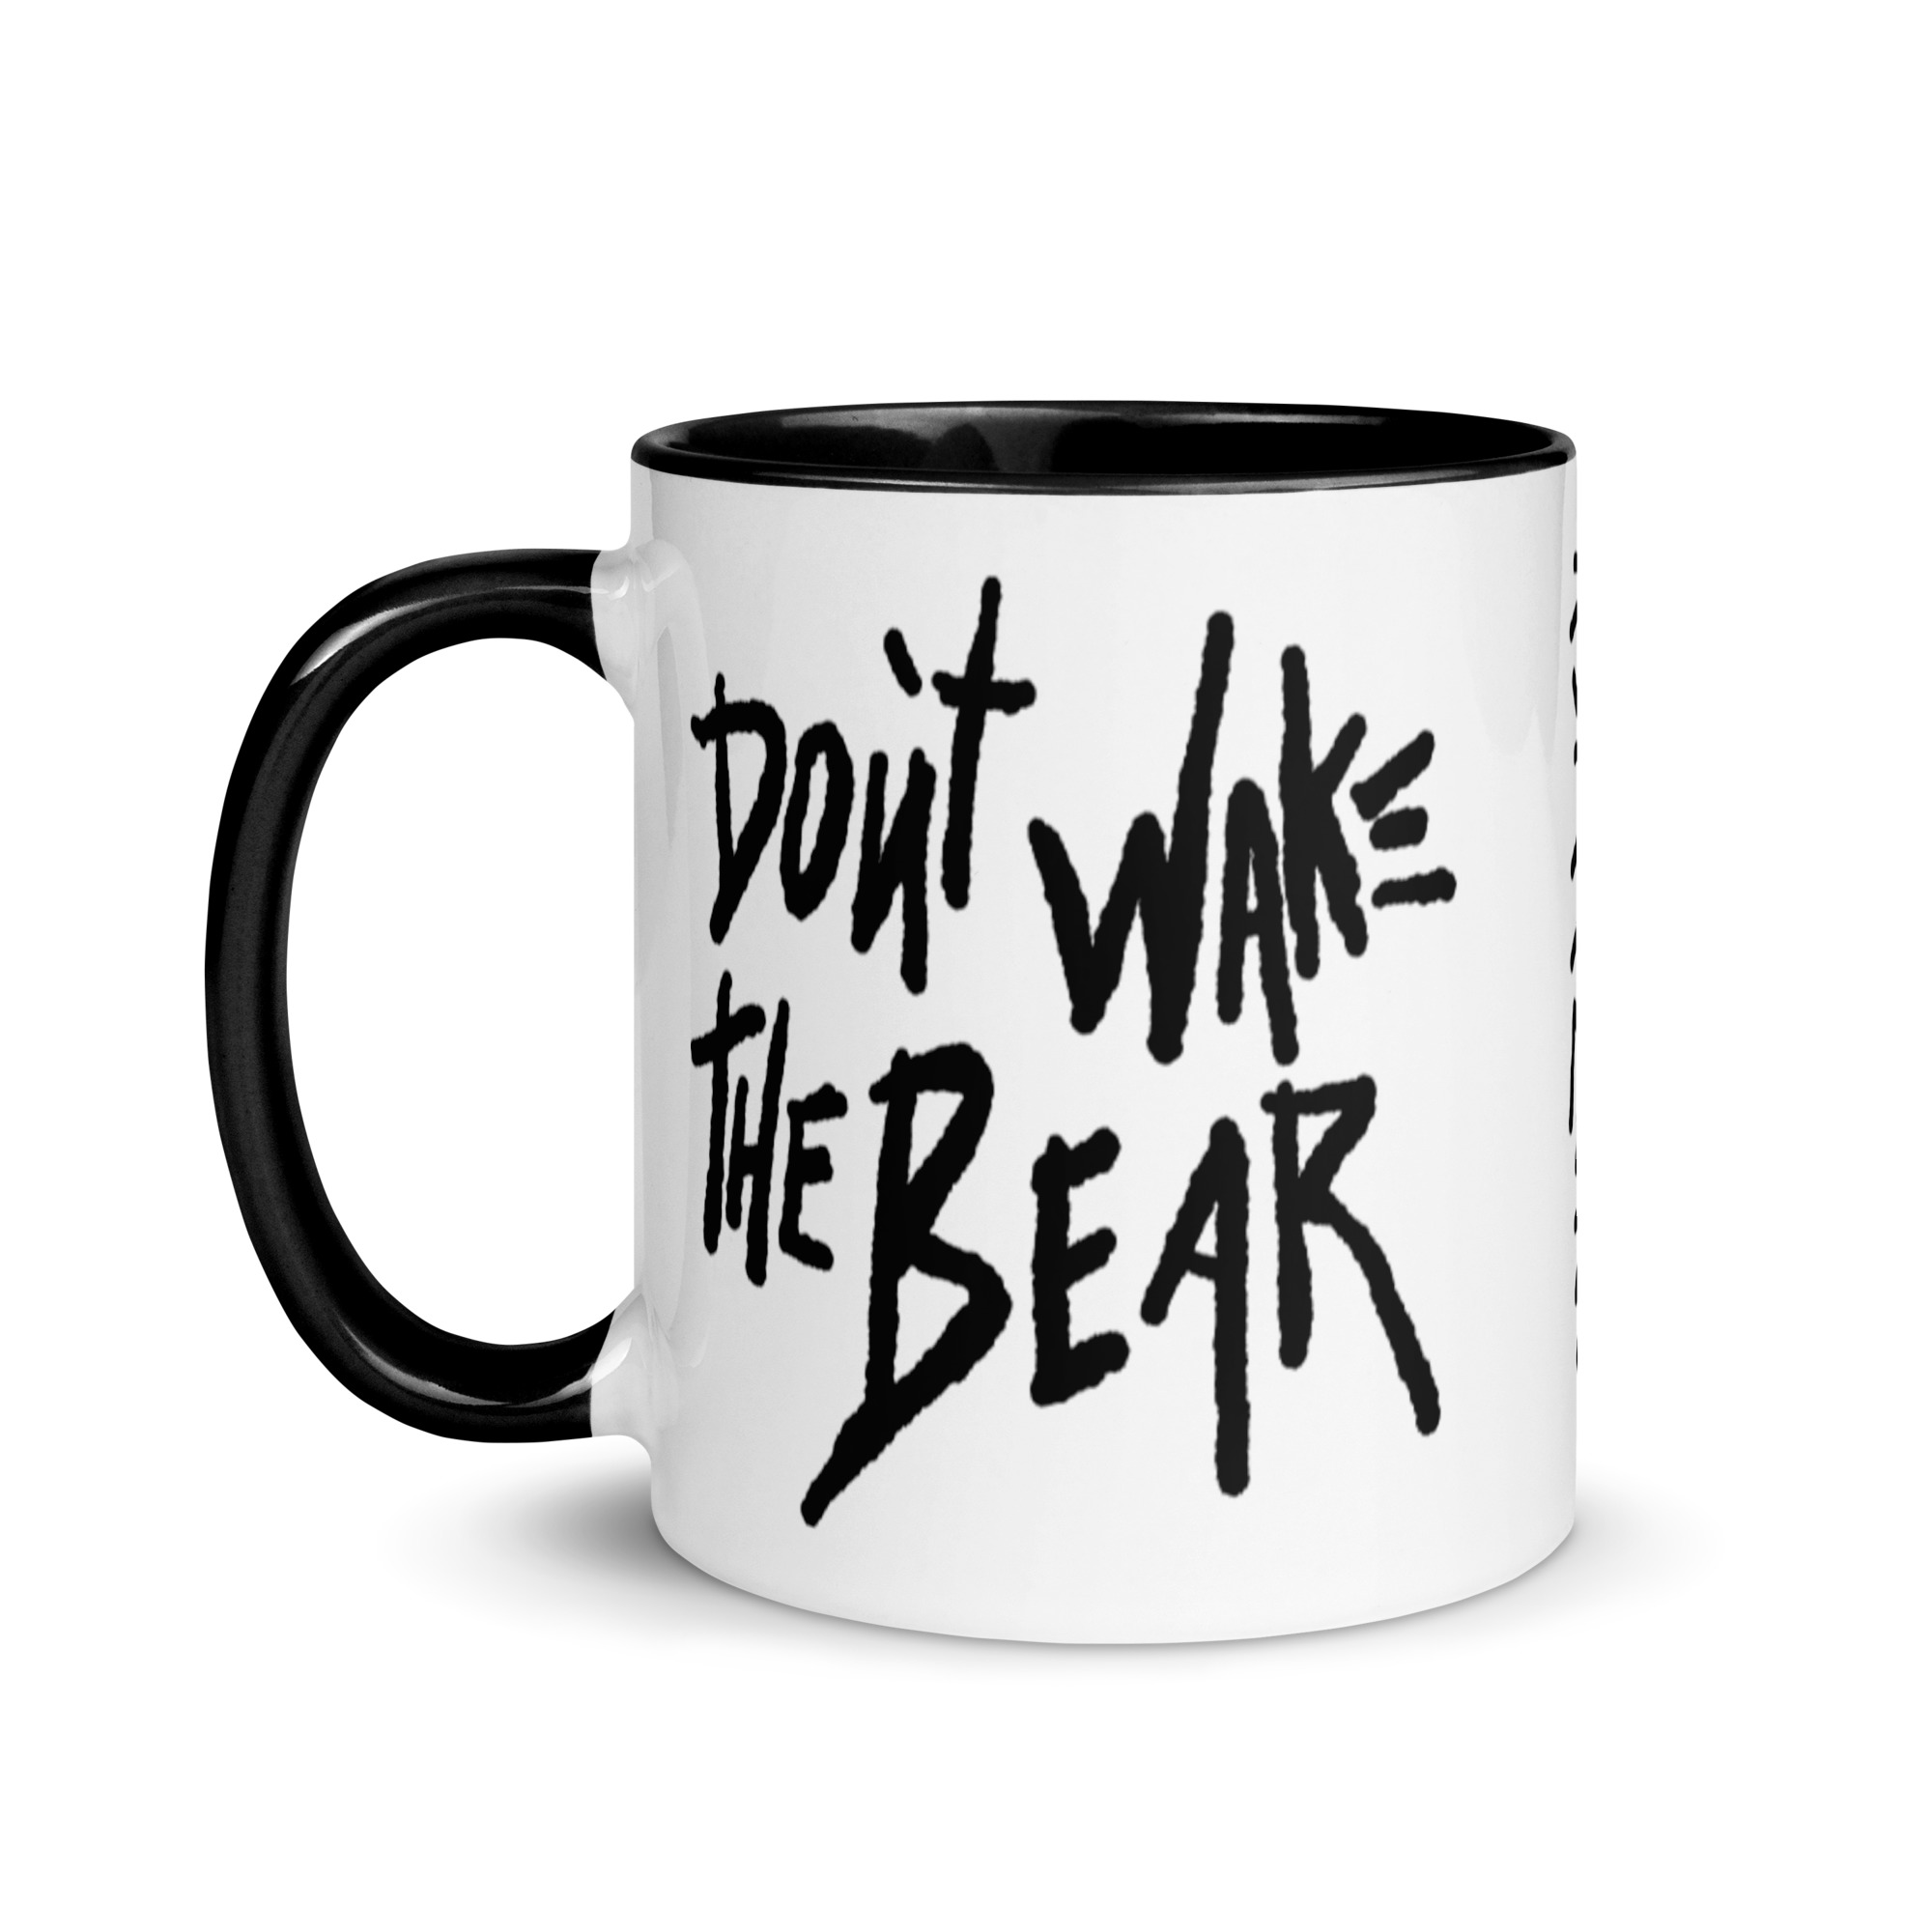 Featured image for “Don’t wake the Bear - Mug”